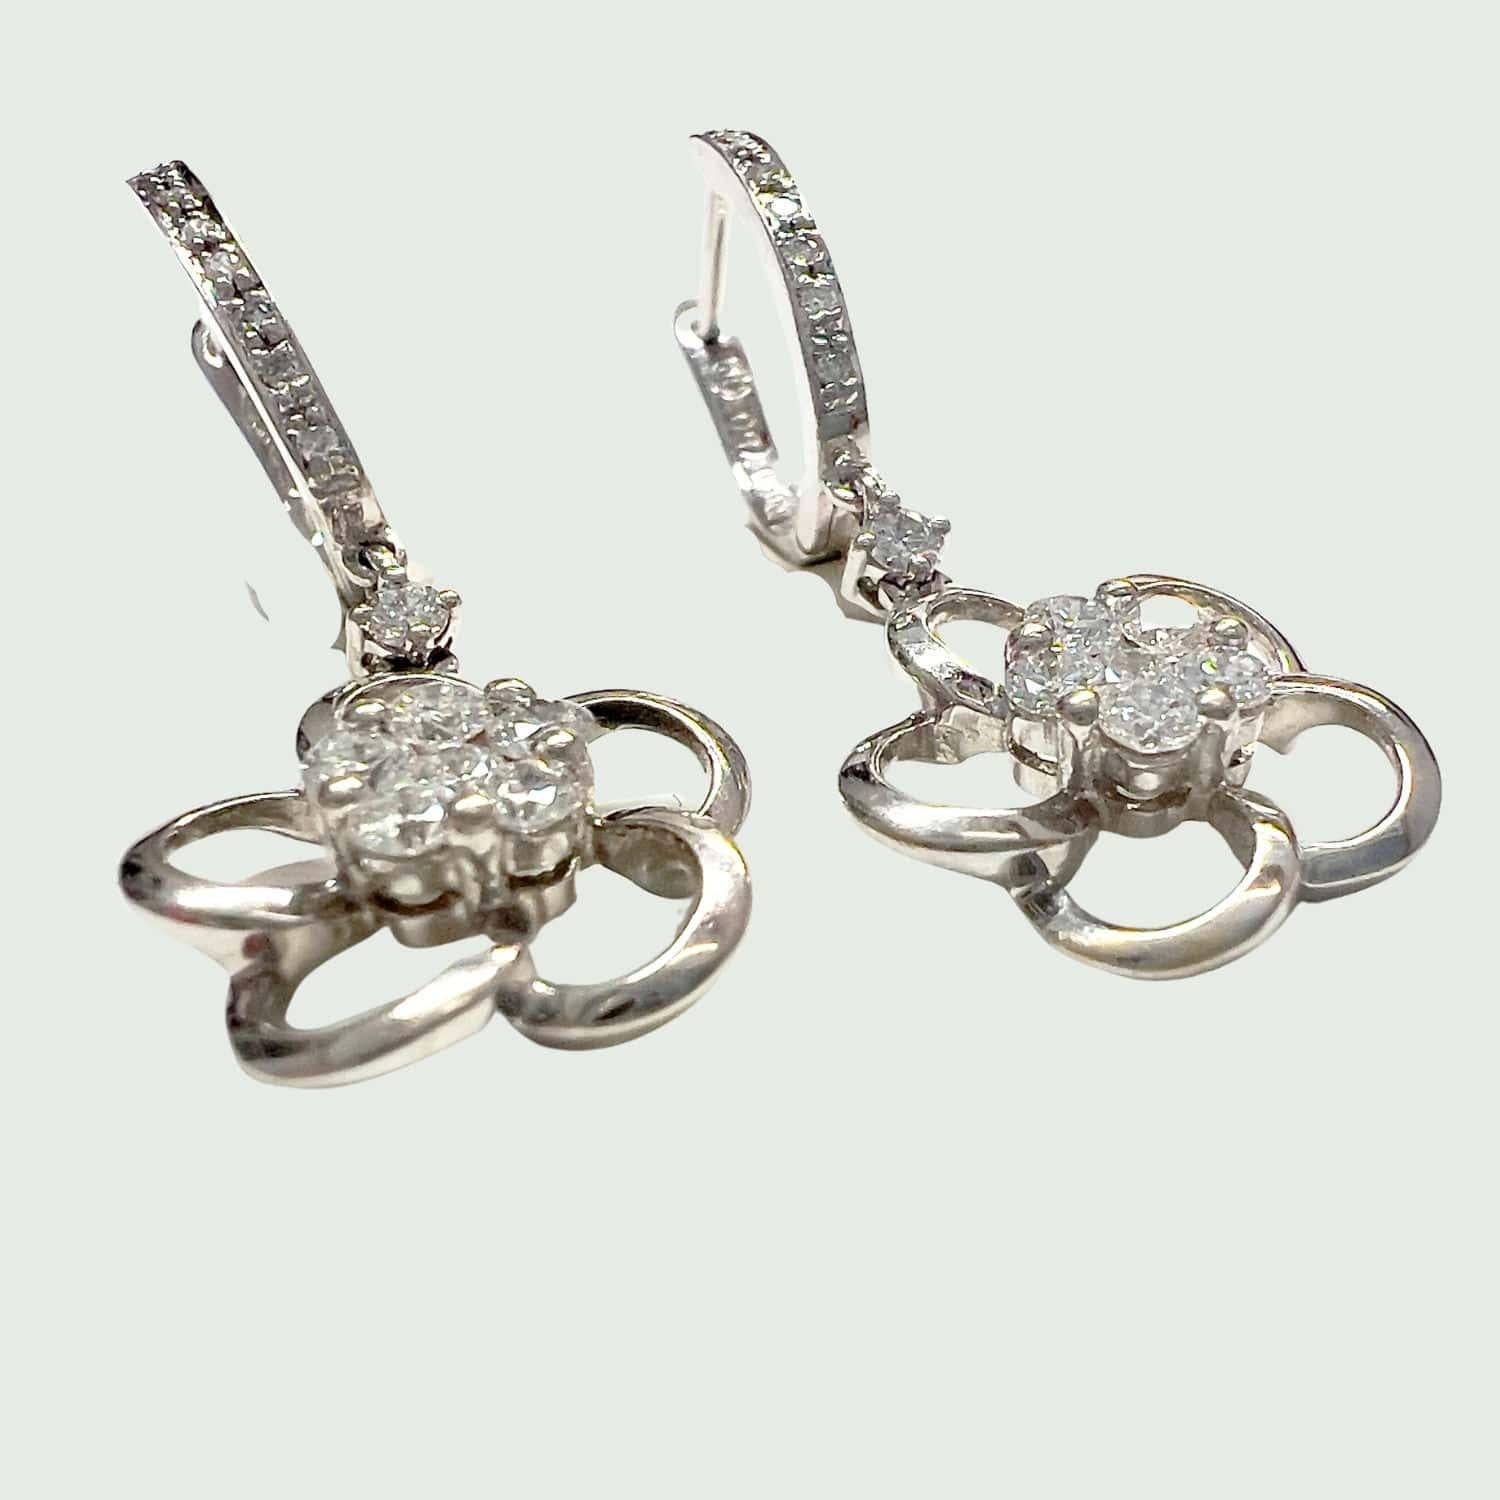 These contemporary design earrings crafted from 18-karat yellow gold are a stunning addition to any jewelry collection. Adorned with brilliant-cut diamonds totaling 0.60 carats, these earrings exude elegance and sophistication.
What sets these